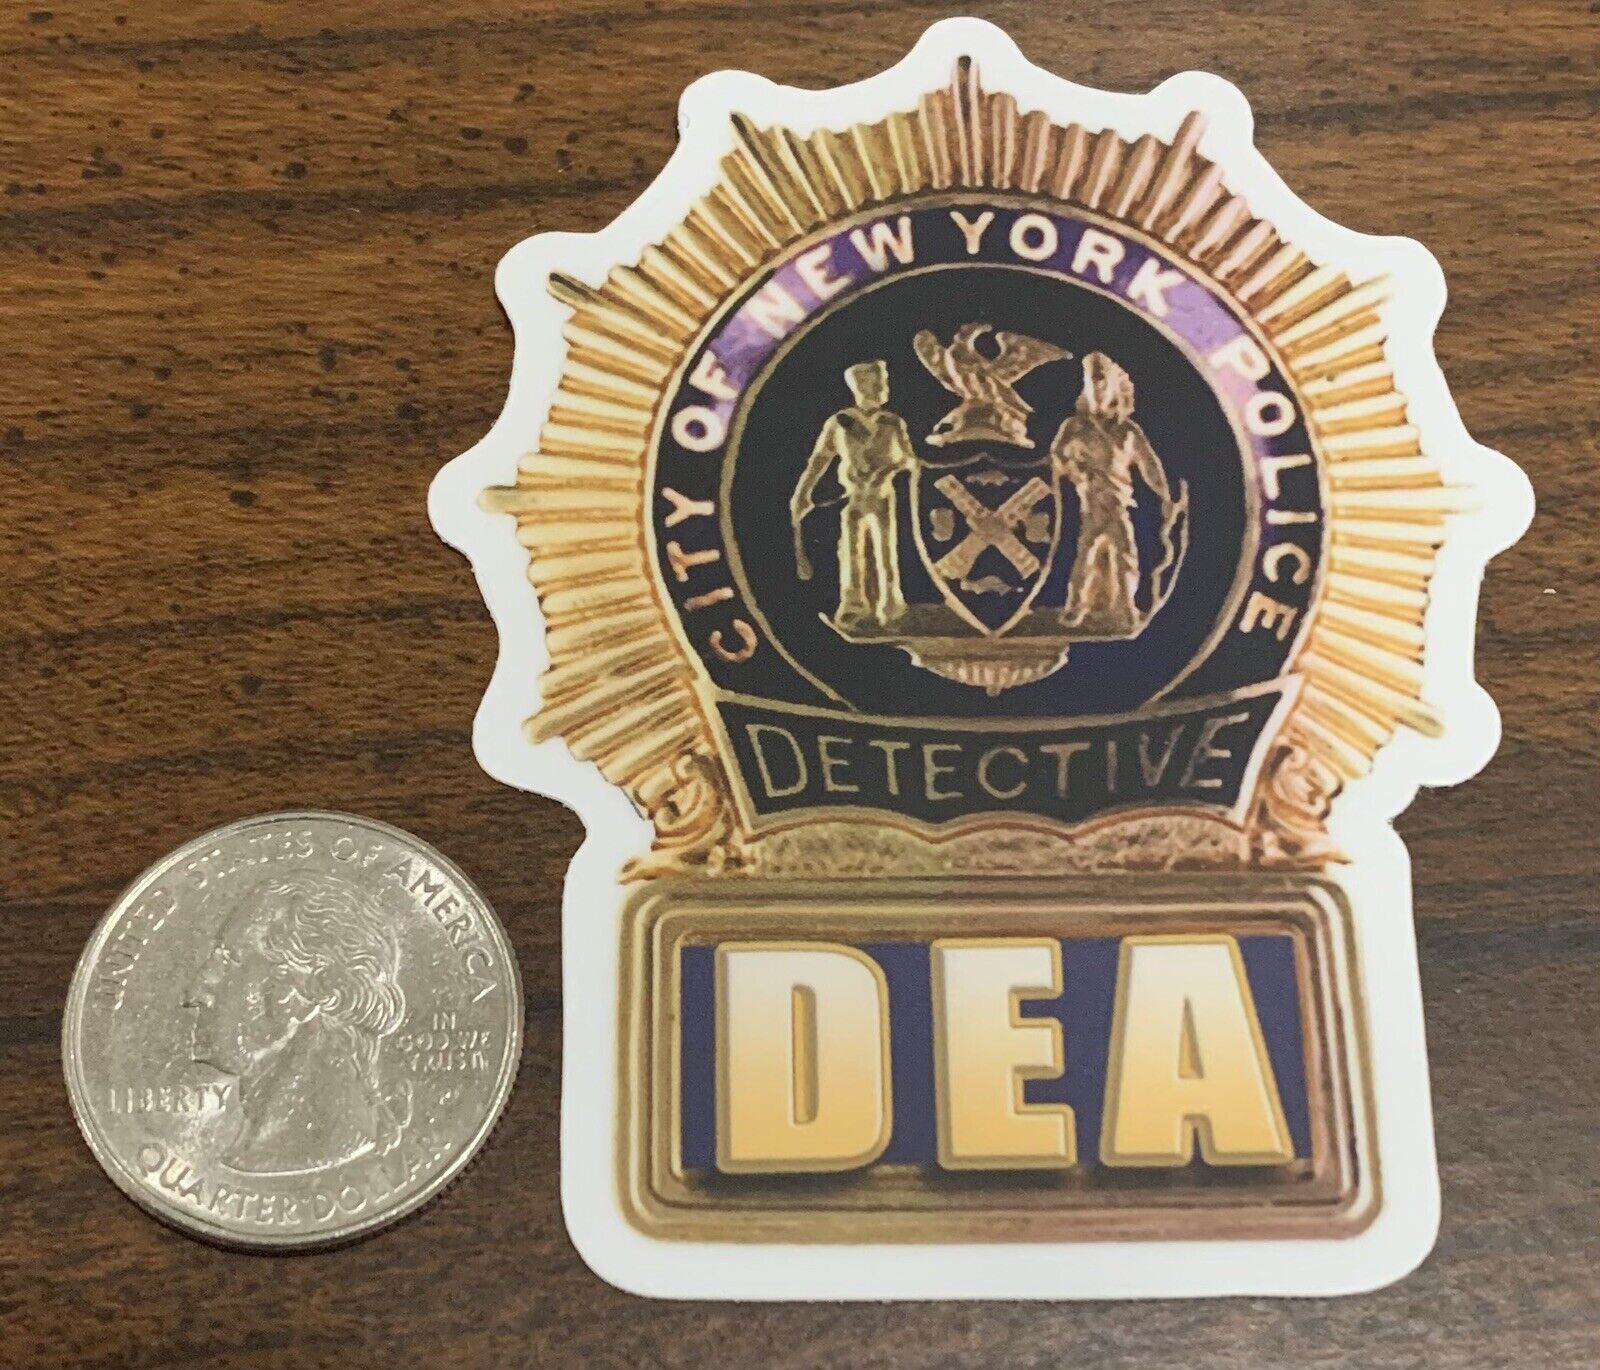 NYC NYPD DEA POLICE DETECTIVE EXTERIOR WINDOW DECAL STICKER 3”